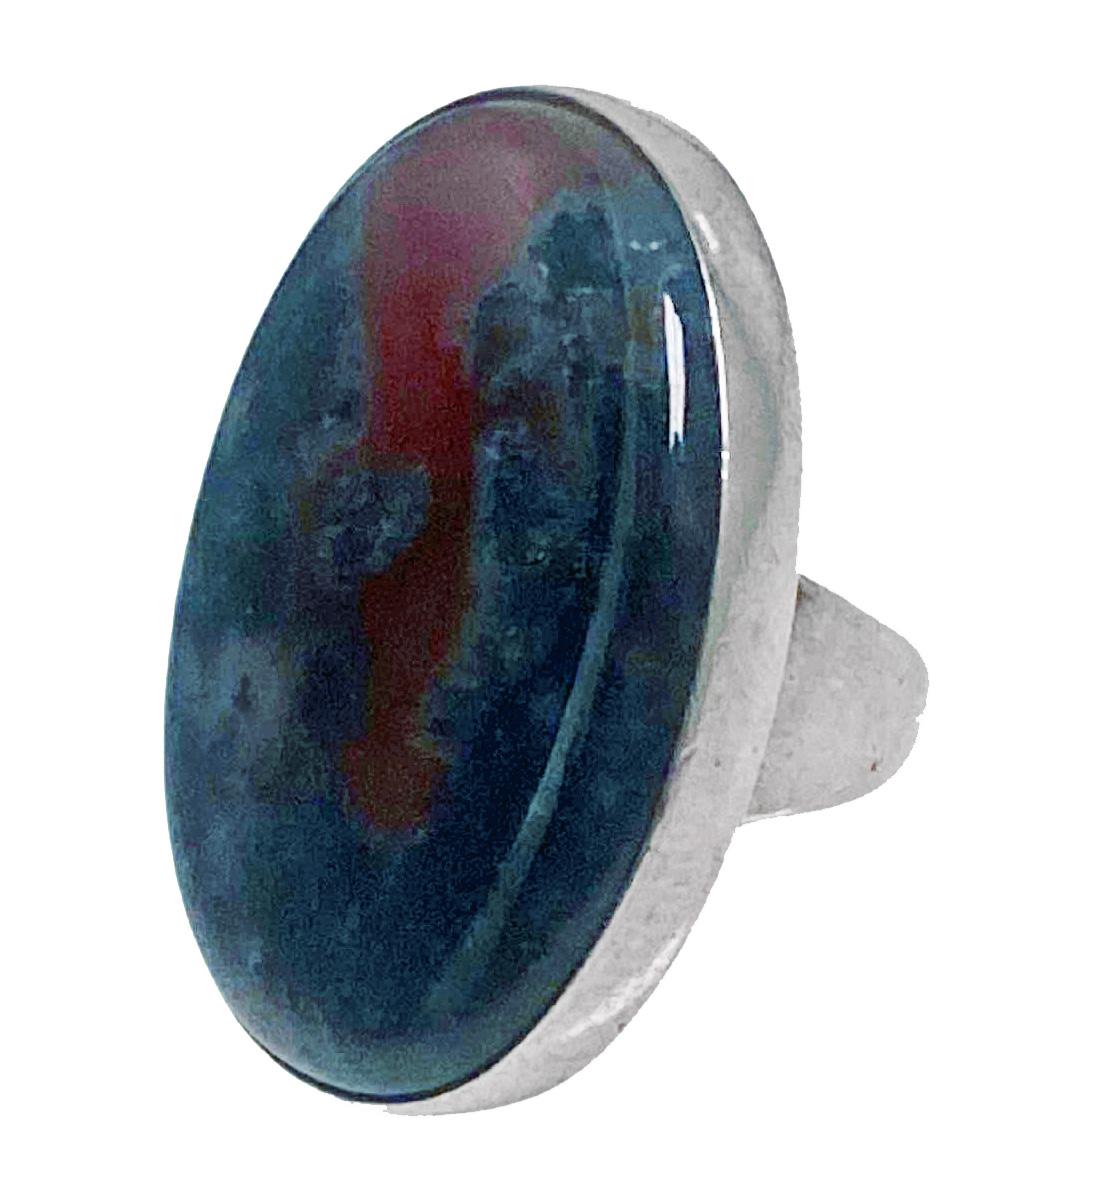 Rare design George Jensen Sterling Silver bloodstone agate Ring C.1960. Bezel set with large oval cabochon bloodstone agate gauging approximately 35 mm x 28 mm, plain shank full Georg Jensen hallmarks 925 S Denmark and design number 90D. Ring size: